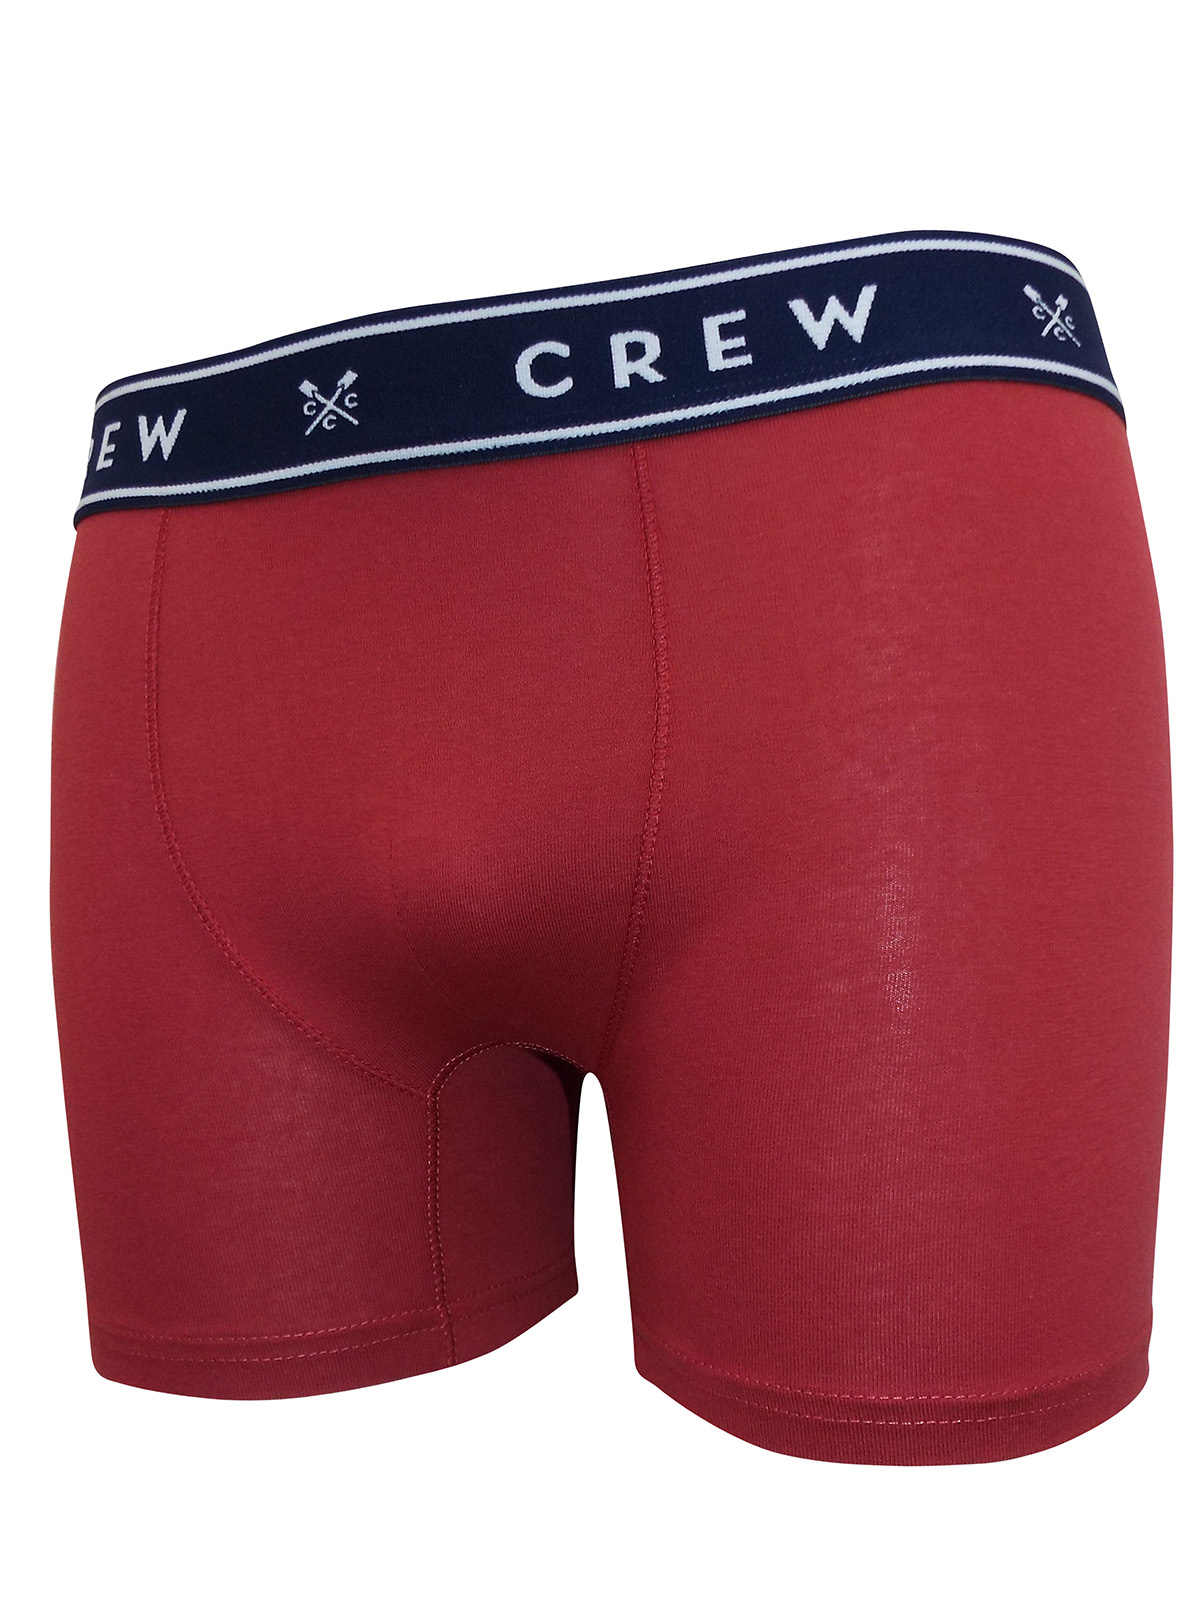 Crew Clothing - - Crew Clothing RED Cotton Rich Branded Waist Boxers ...